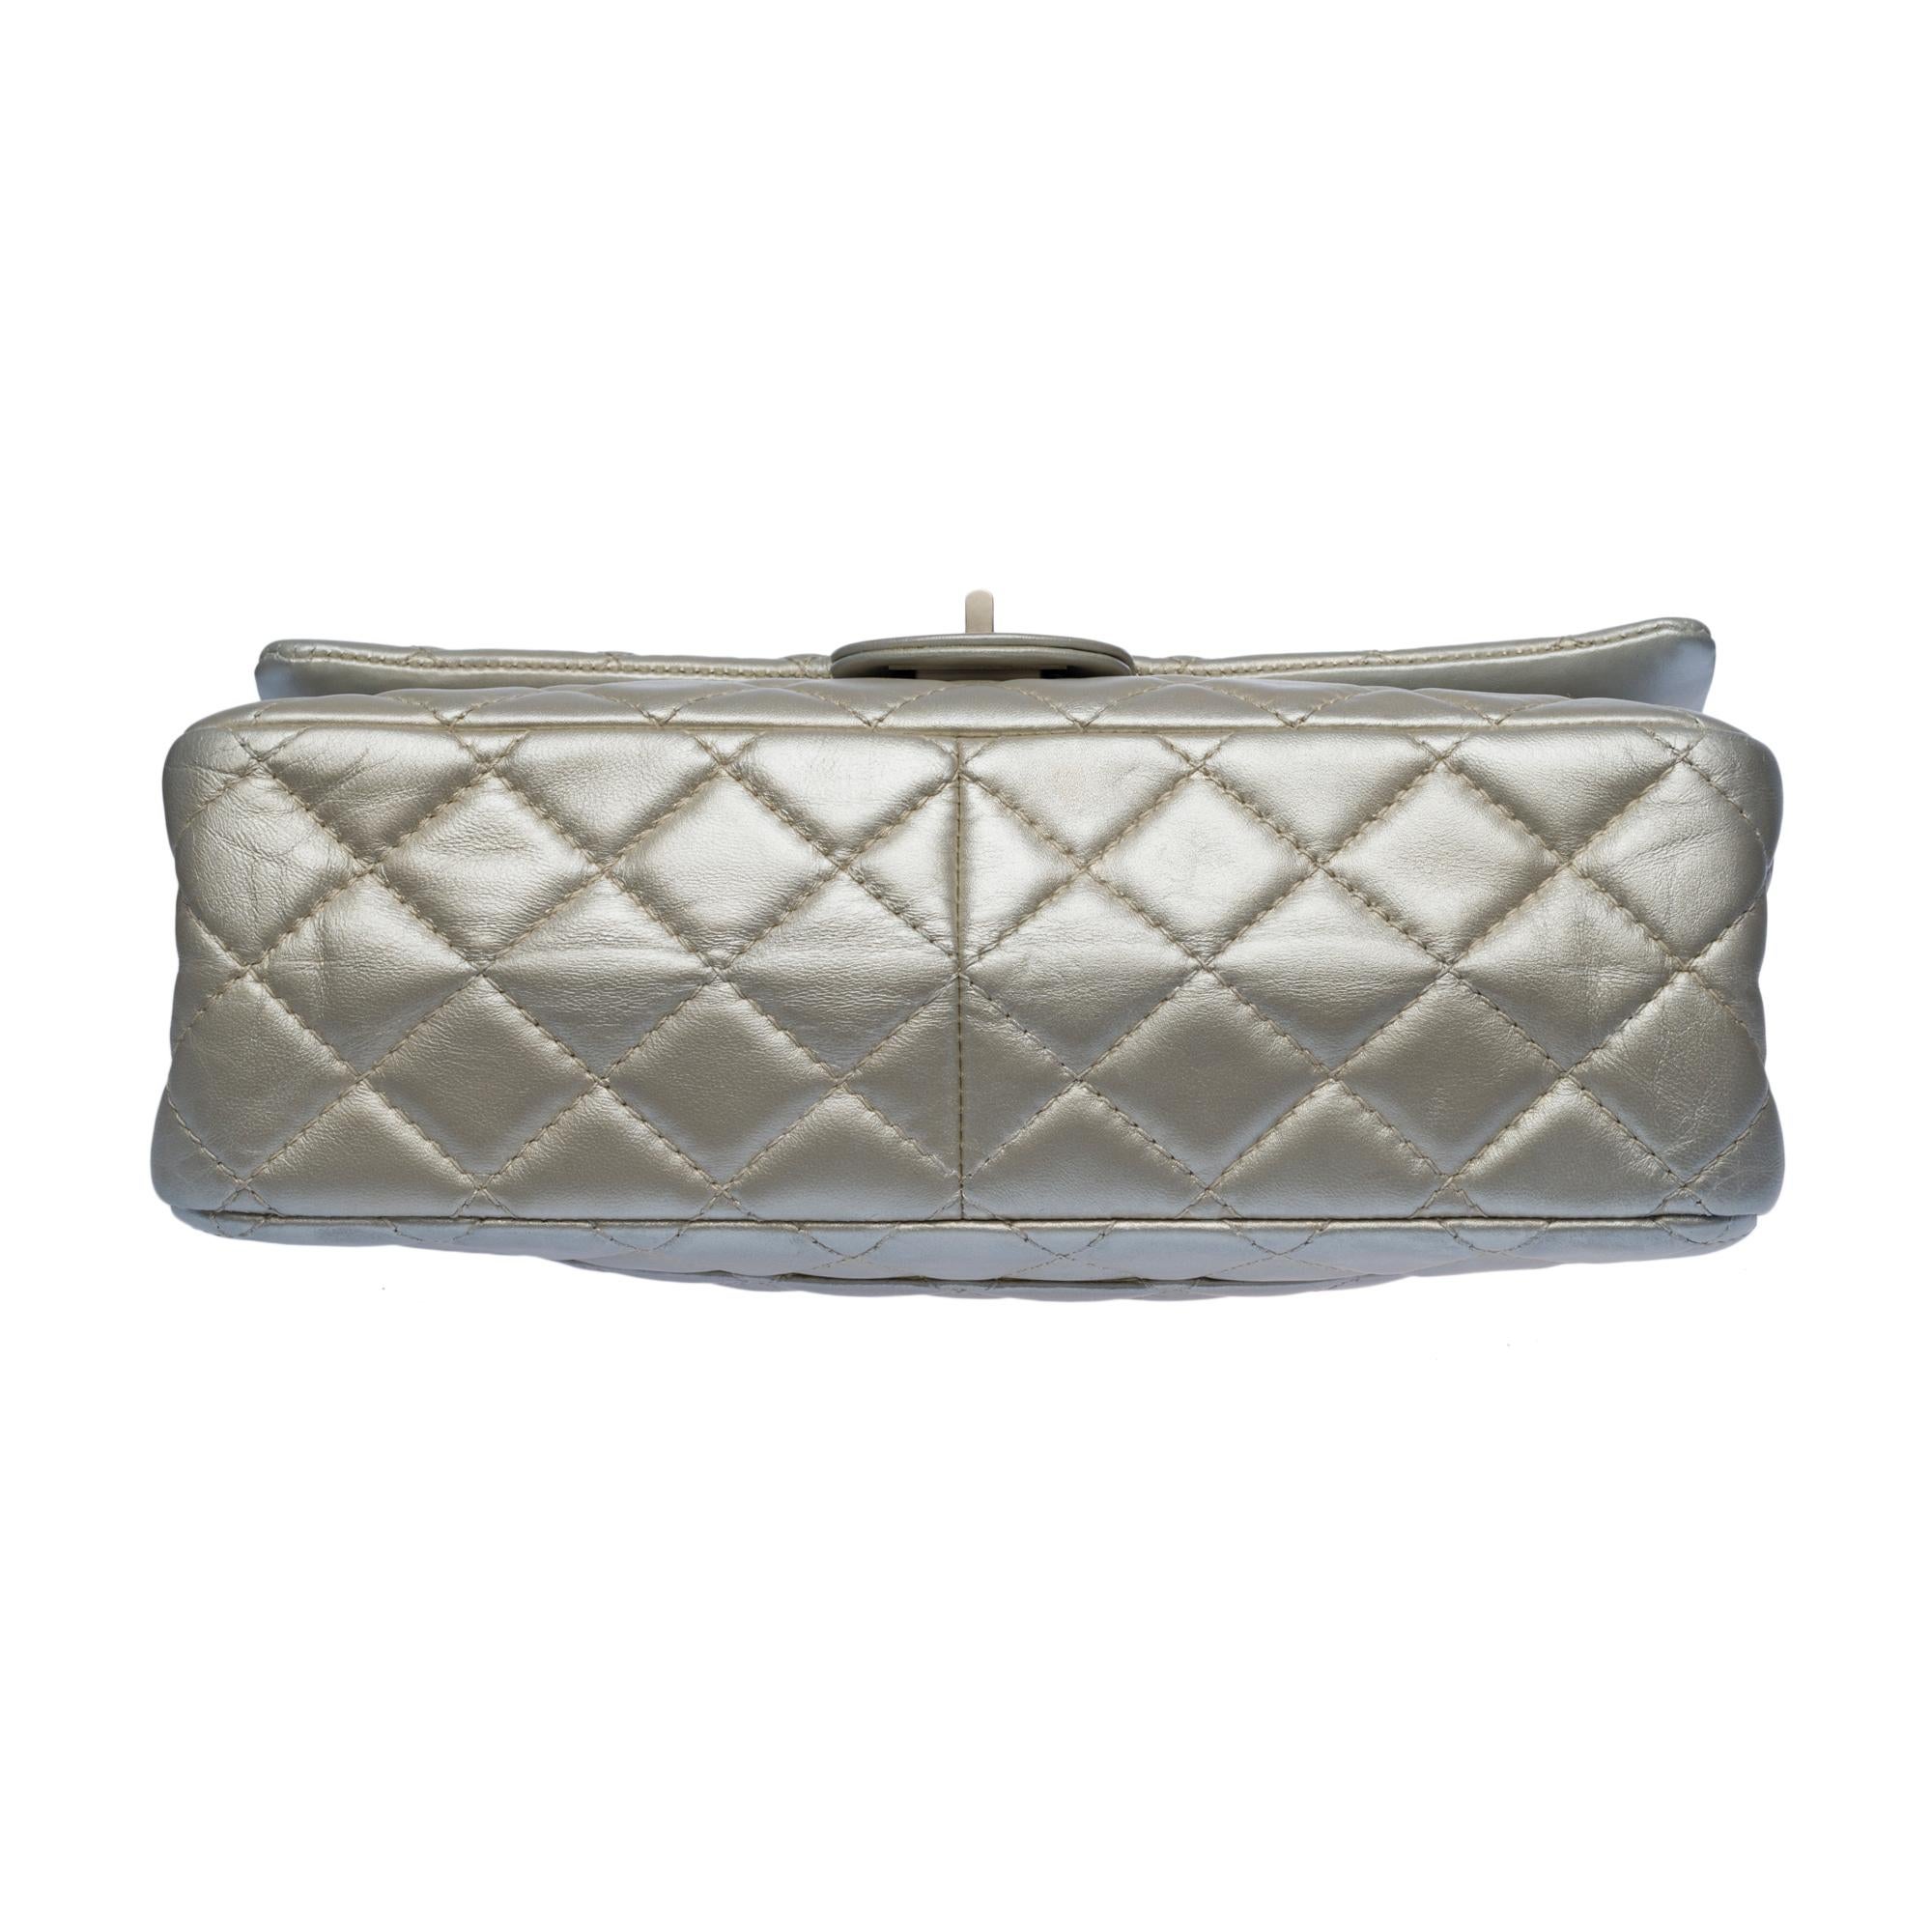 Gorgeous Chanel 2.55 double flap shoulder bag in silver quilted leather, SHW For Sale 5